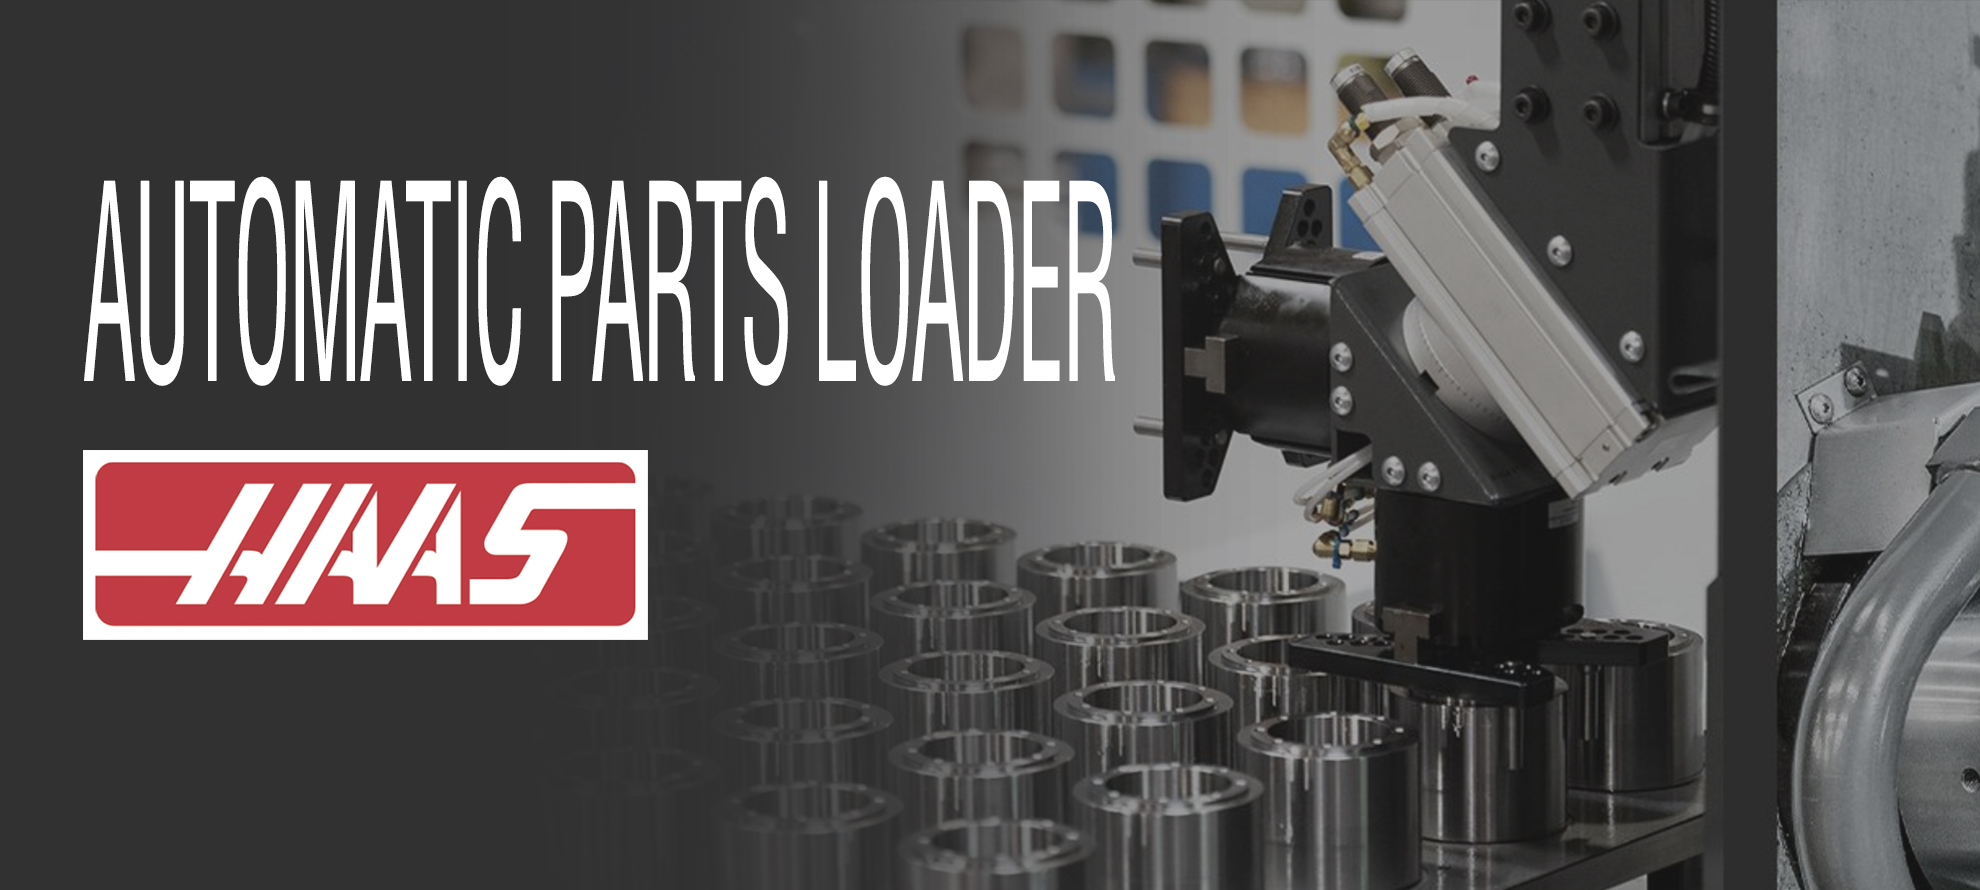 View the HAAS Auto Parts Loader page